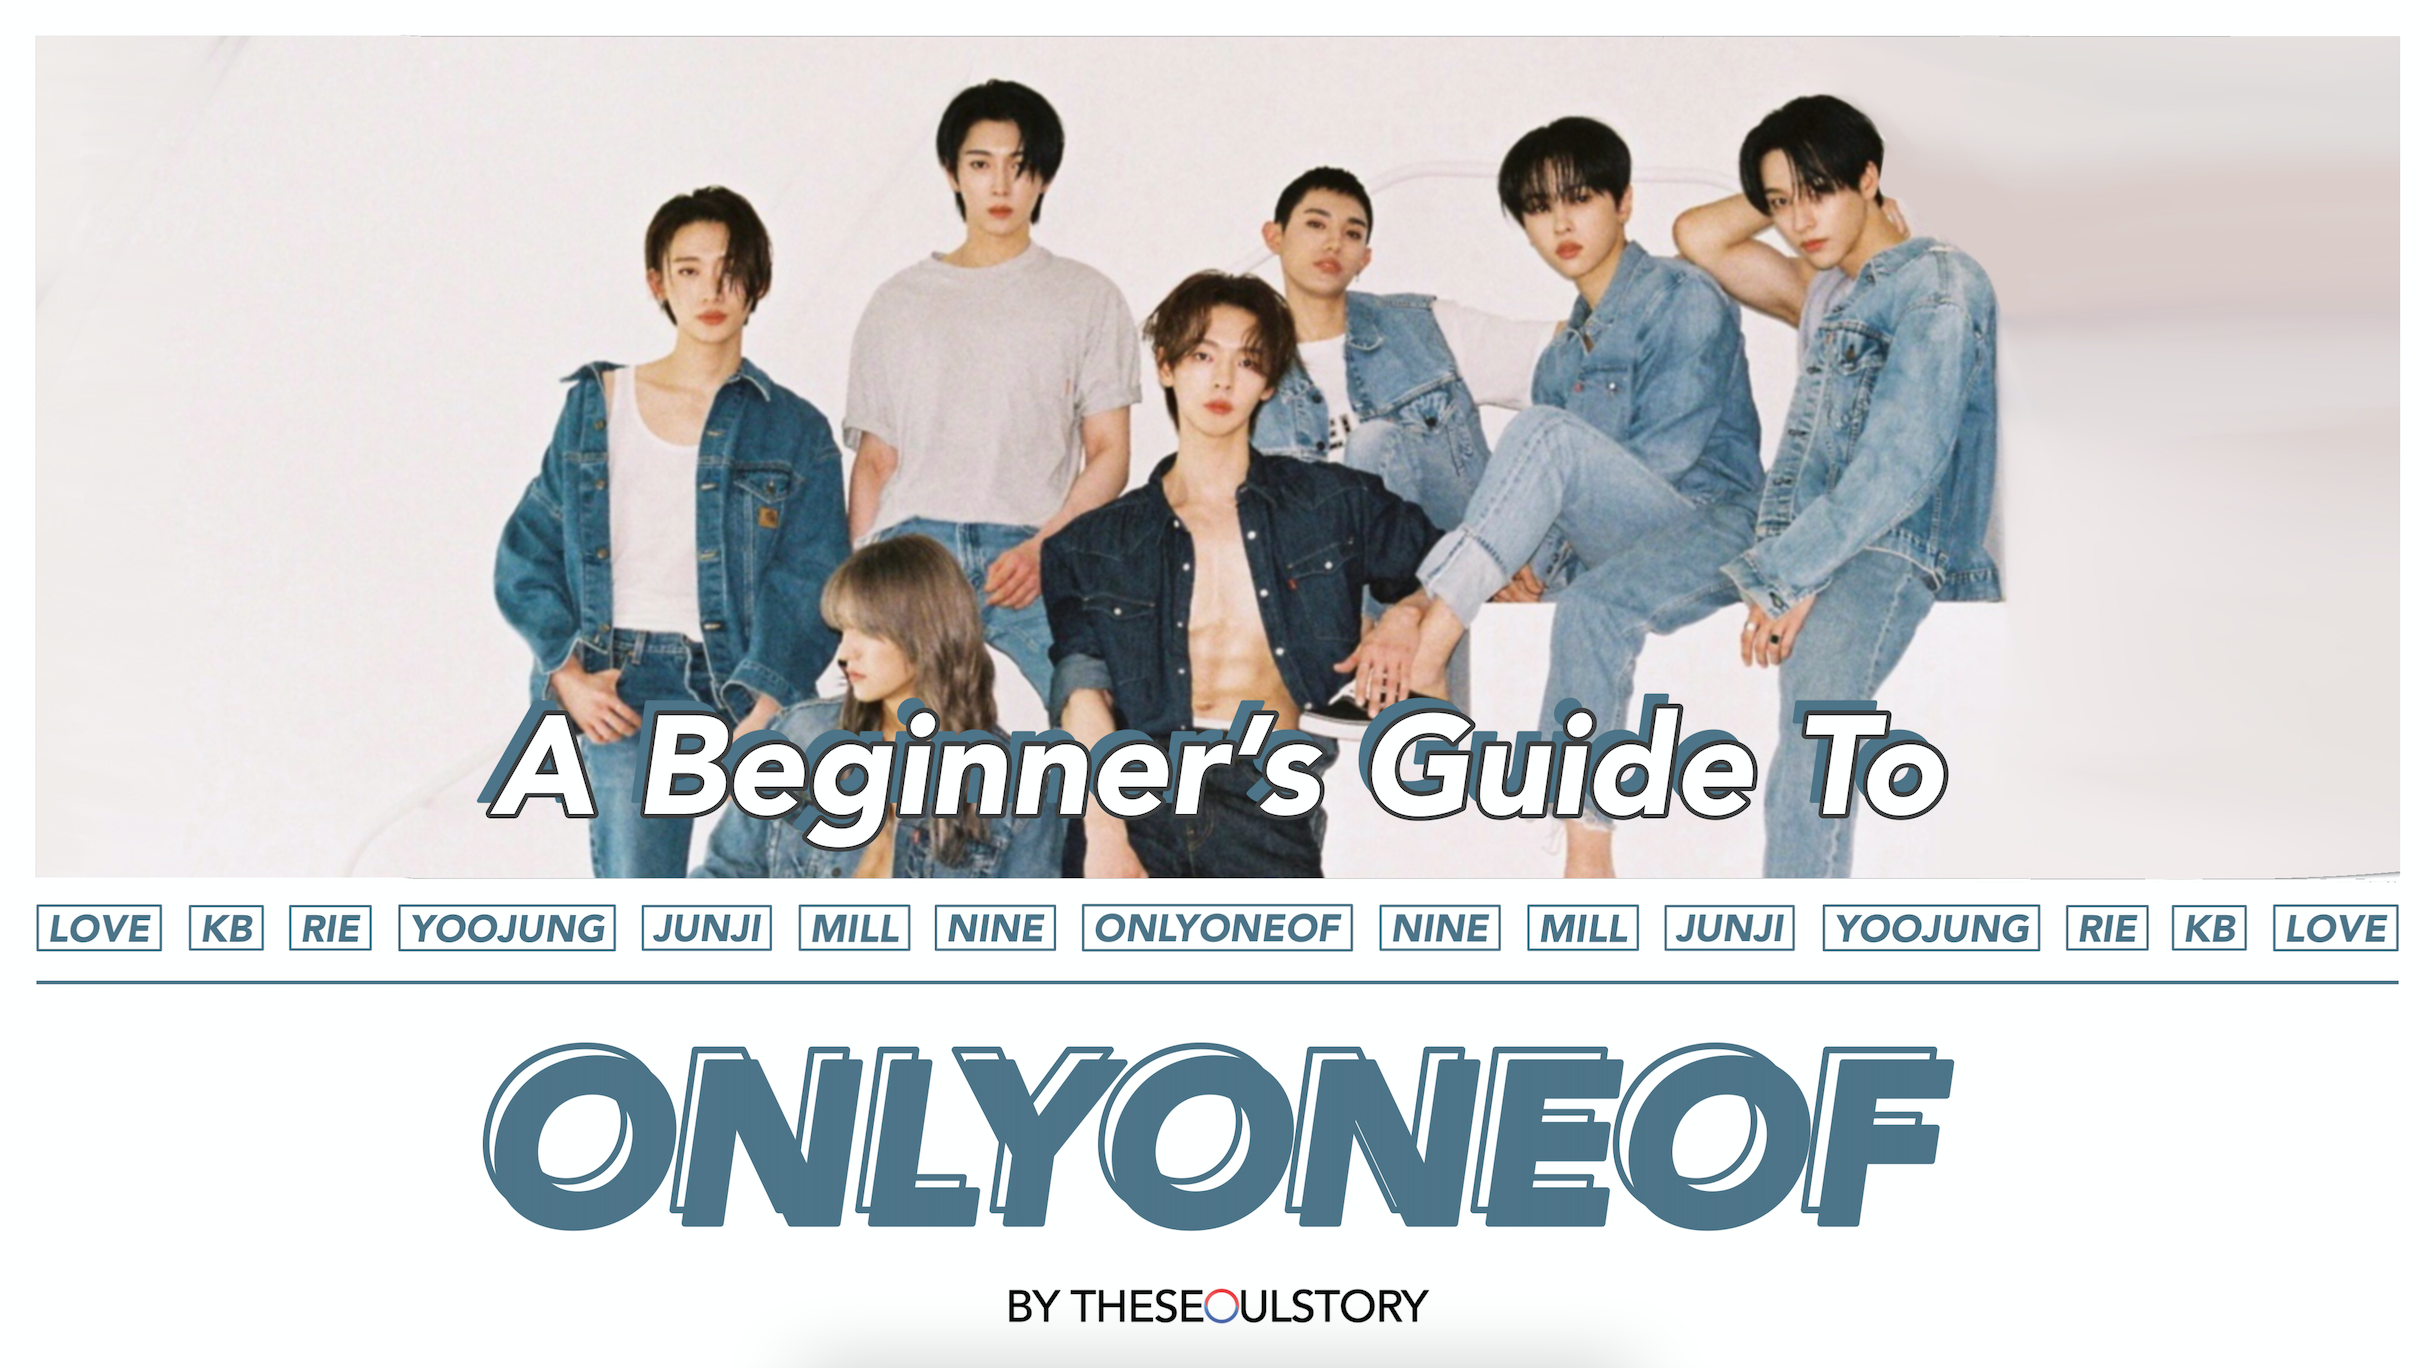 [FEATURE] A Beginner’s Guide to OnlyOneOf